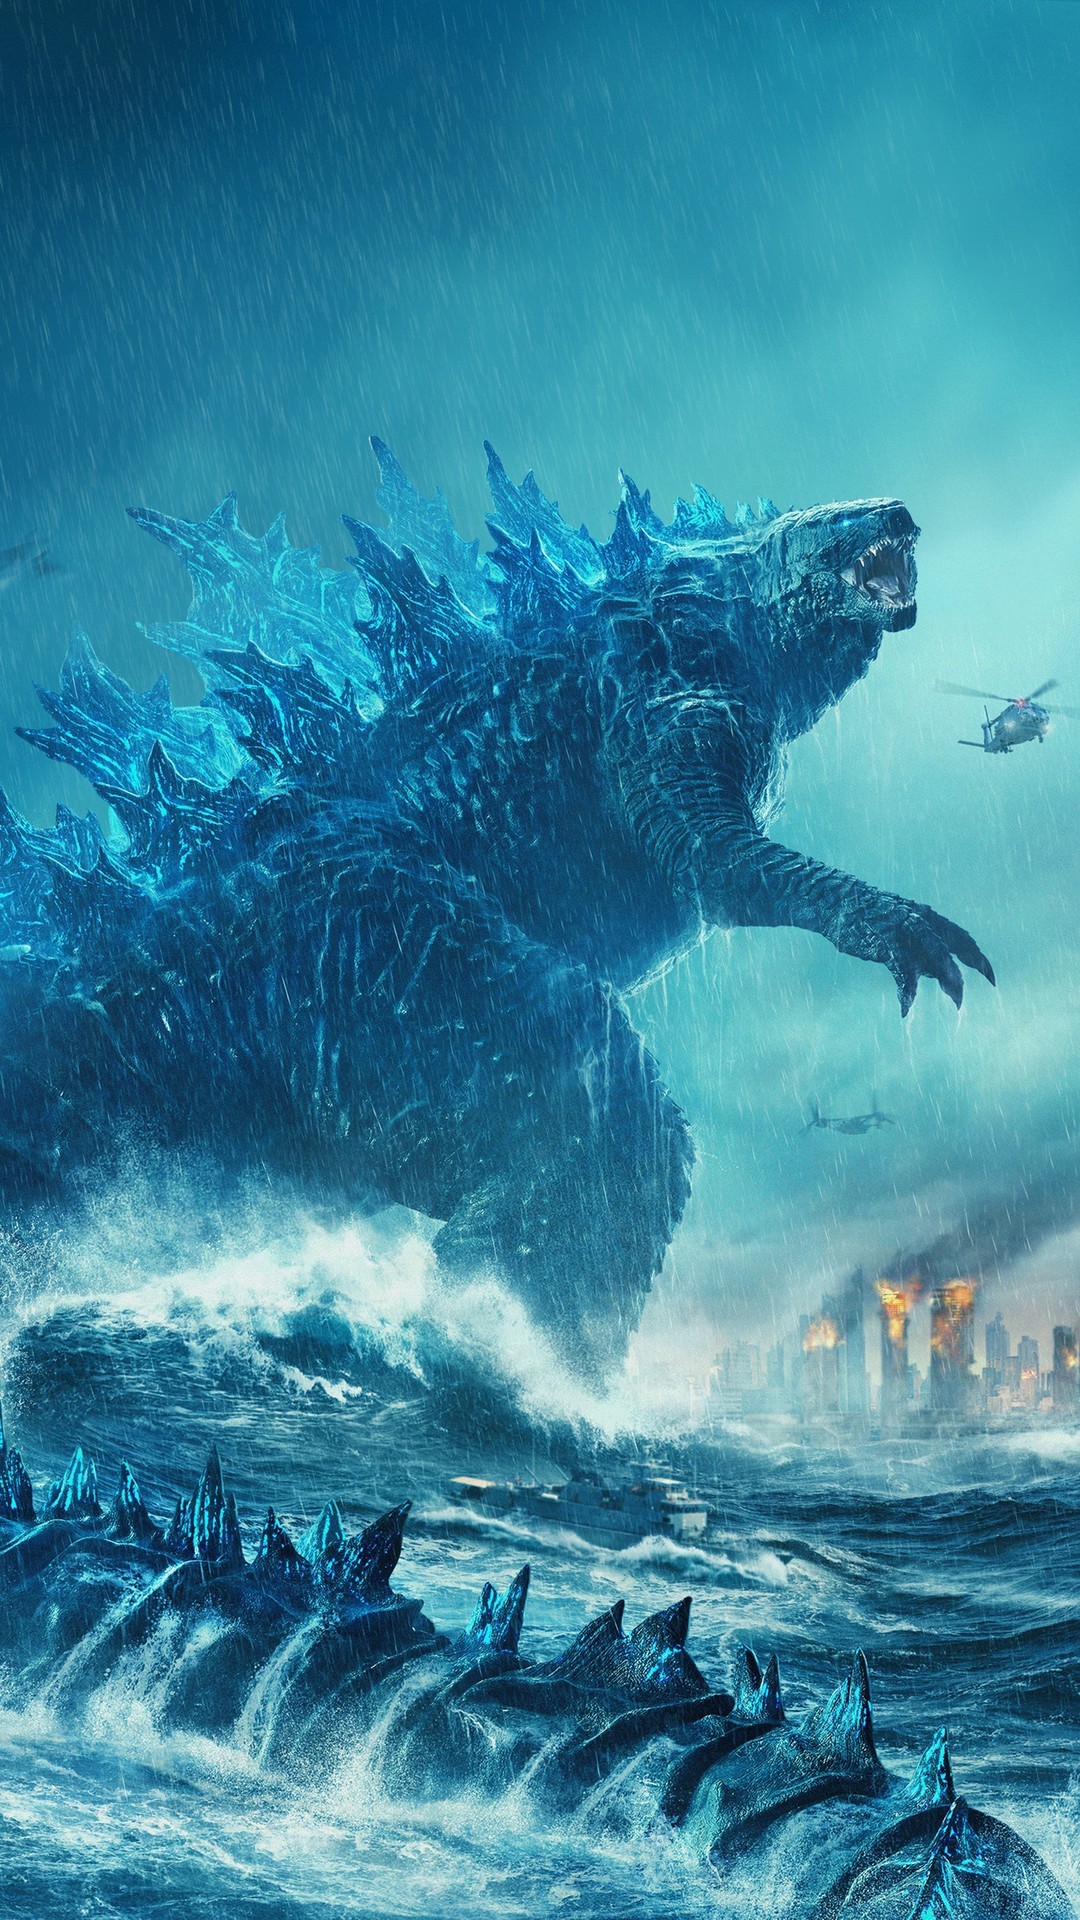 Godzilla King of the Monsters Wallpaper For iPhone With high-resolution 1080X1920 pixel. You can use this wallpaper for your iPhone 5, 6, 7, 8, X, XS, XR backgrounds, Mobile Screensaver, or iPad Lock Screen